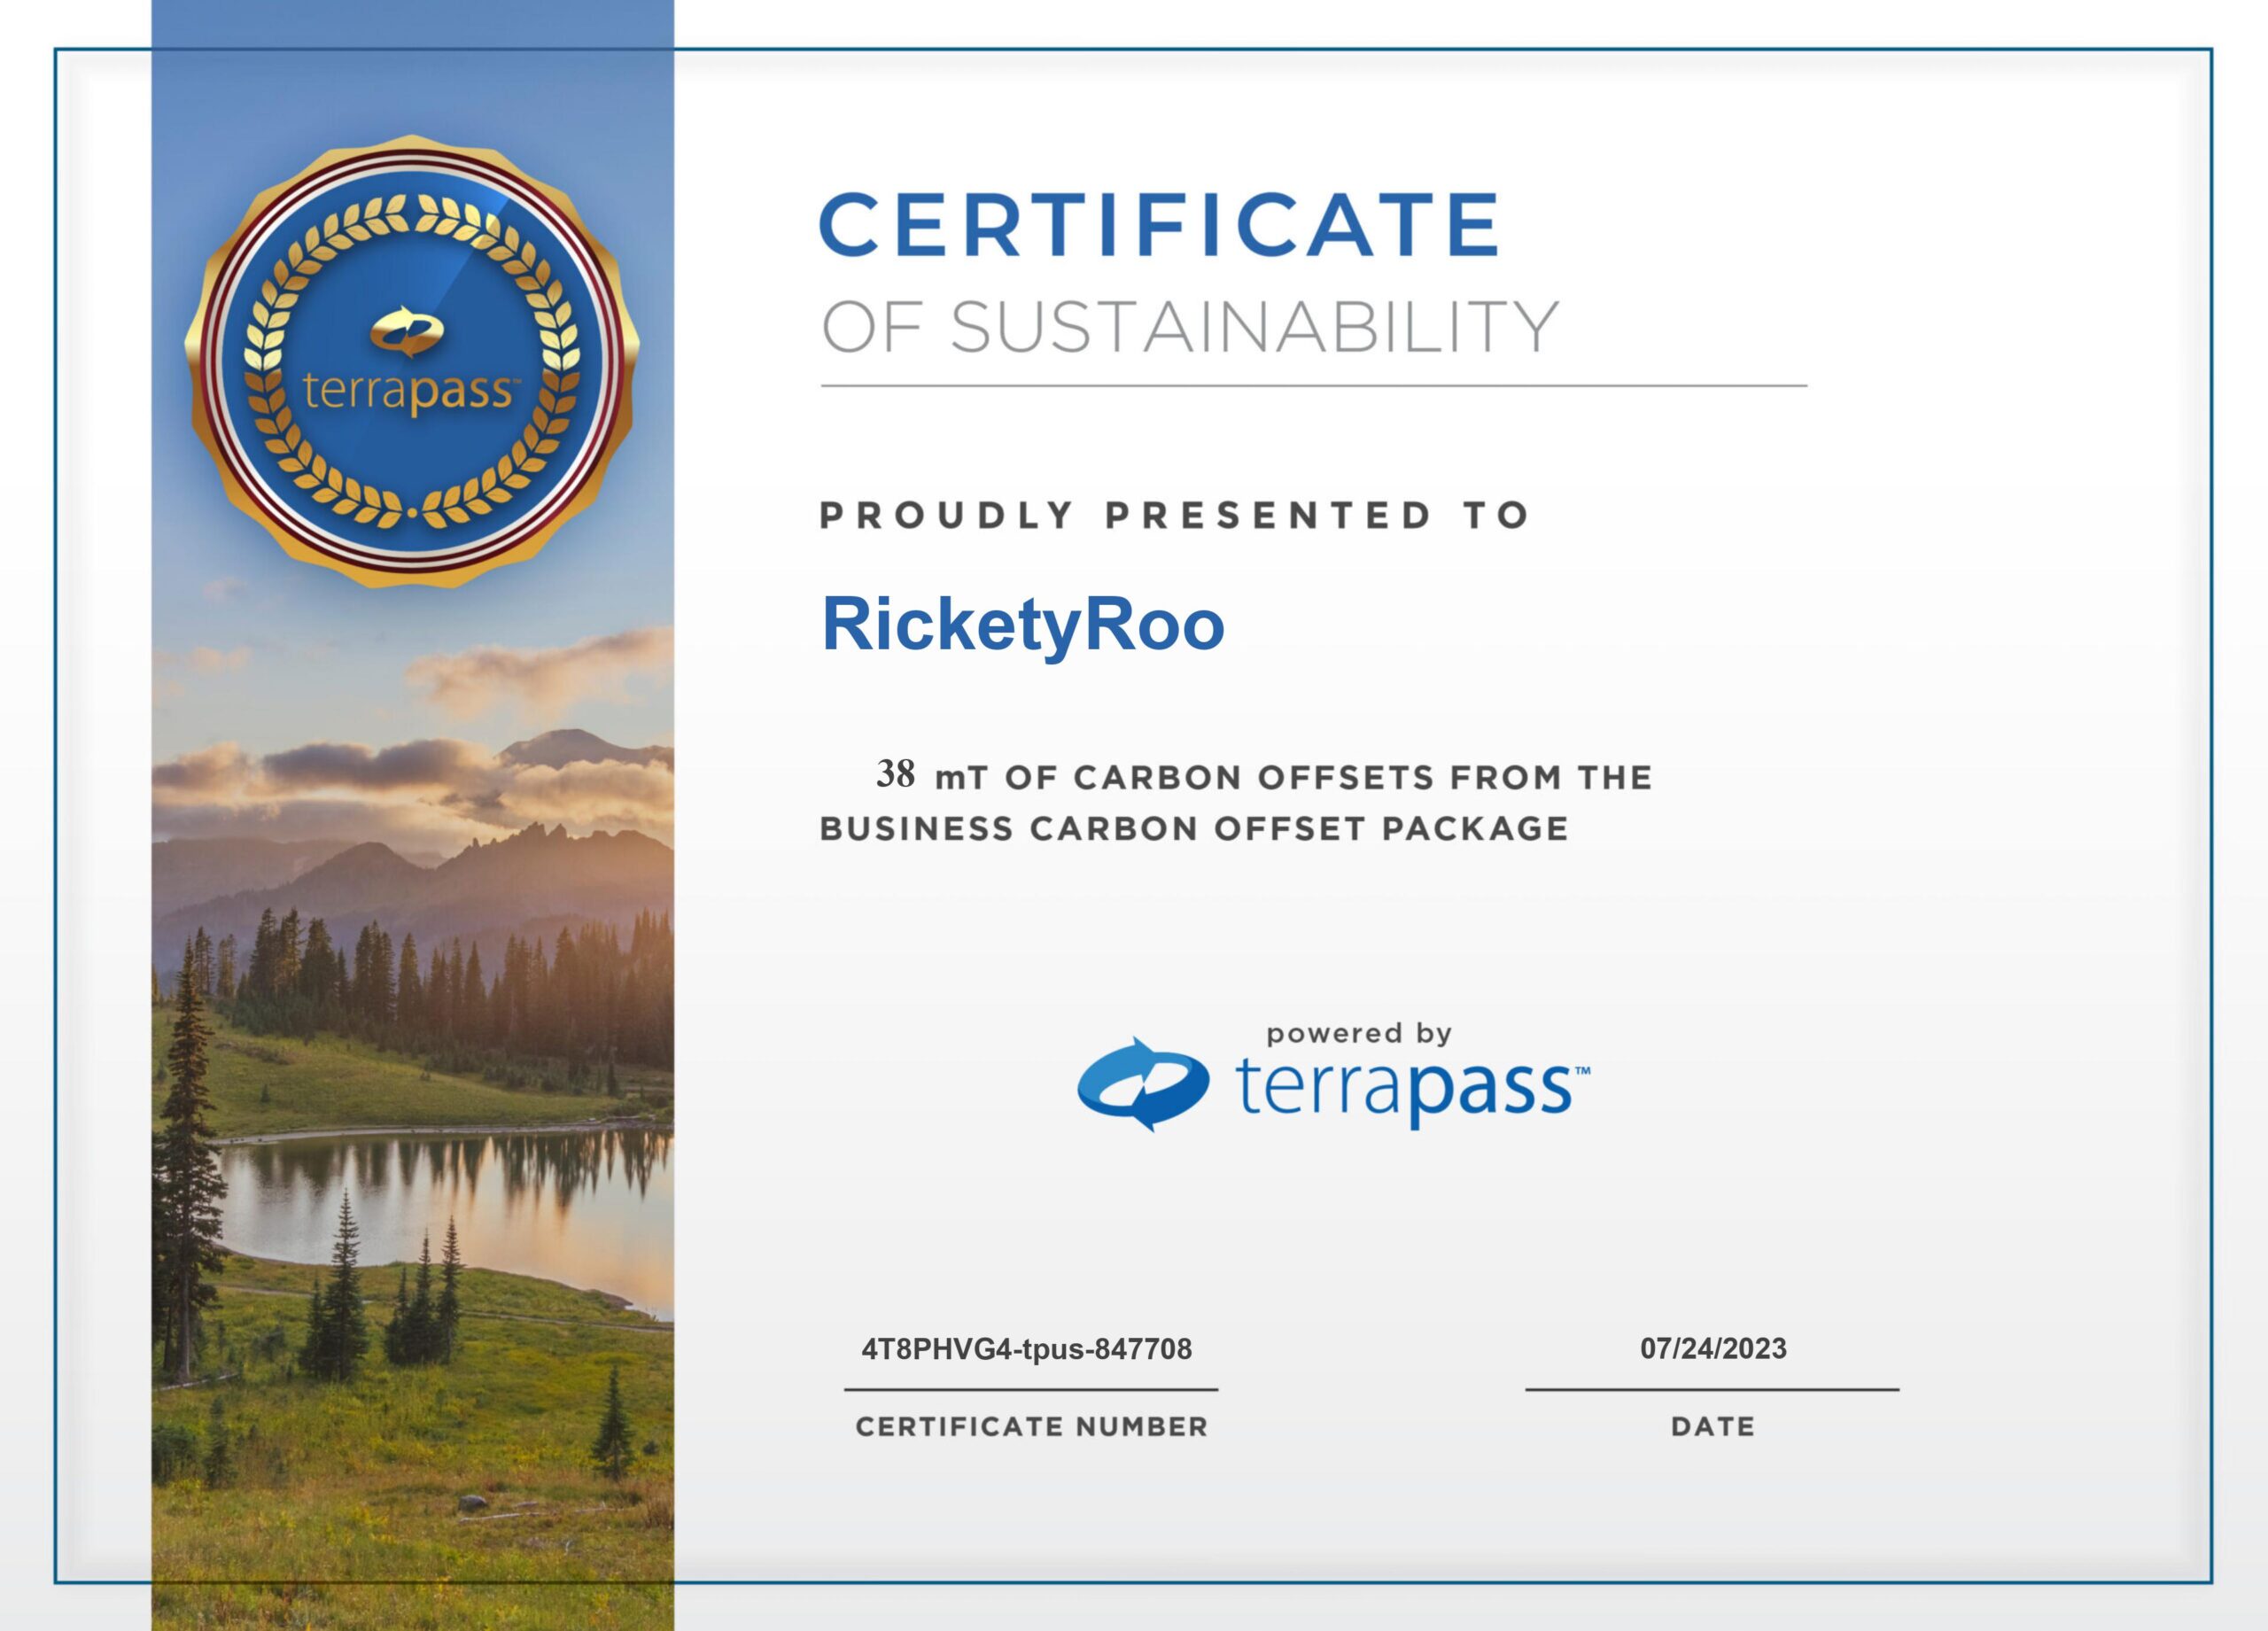 terrapass Certificate of Sustainability presented to RicketyRoo for 38 mT of carbon offsets